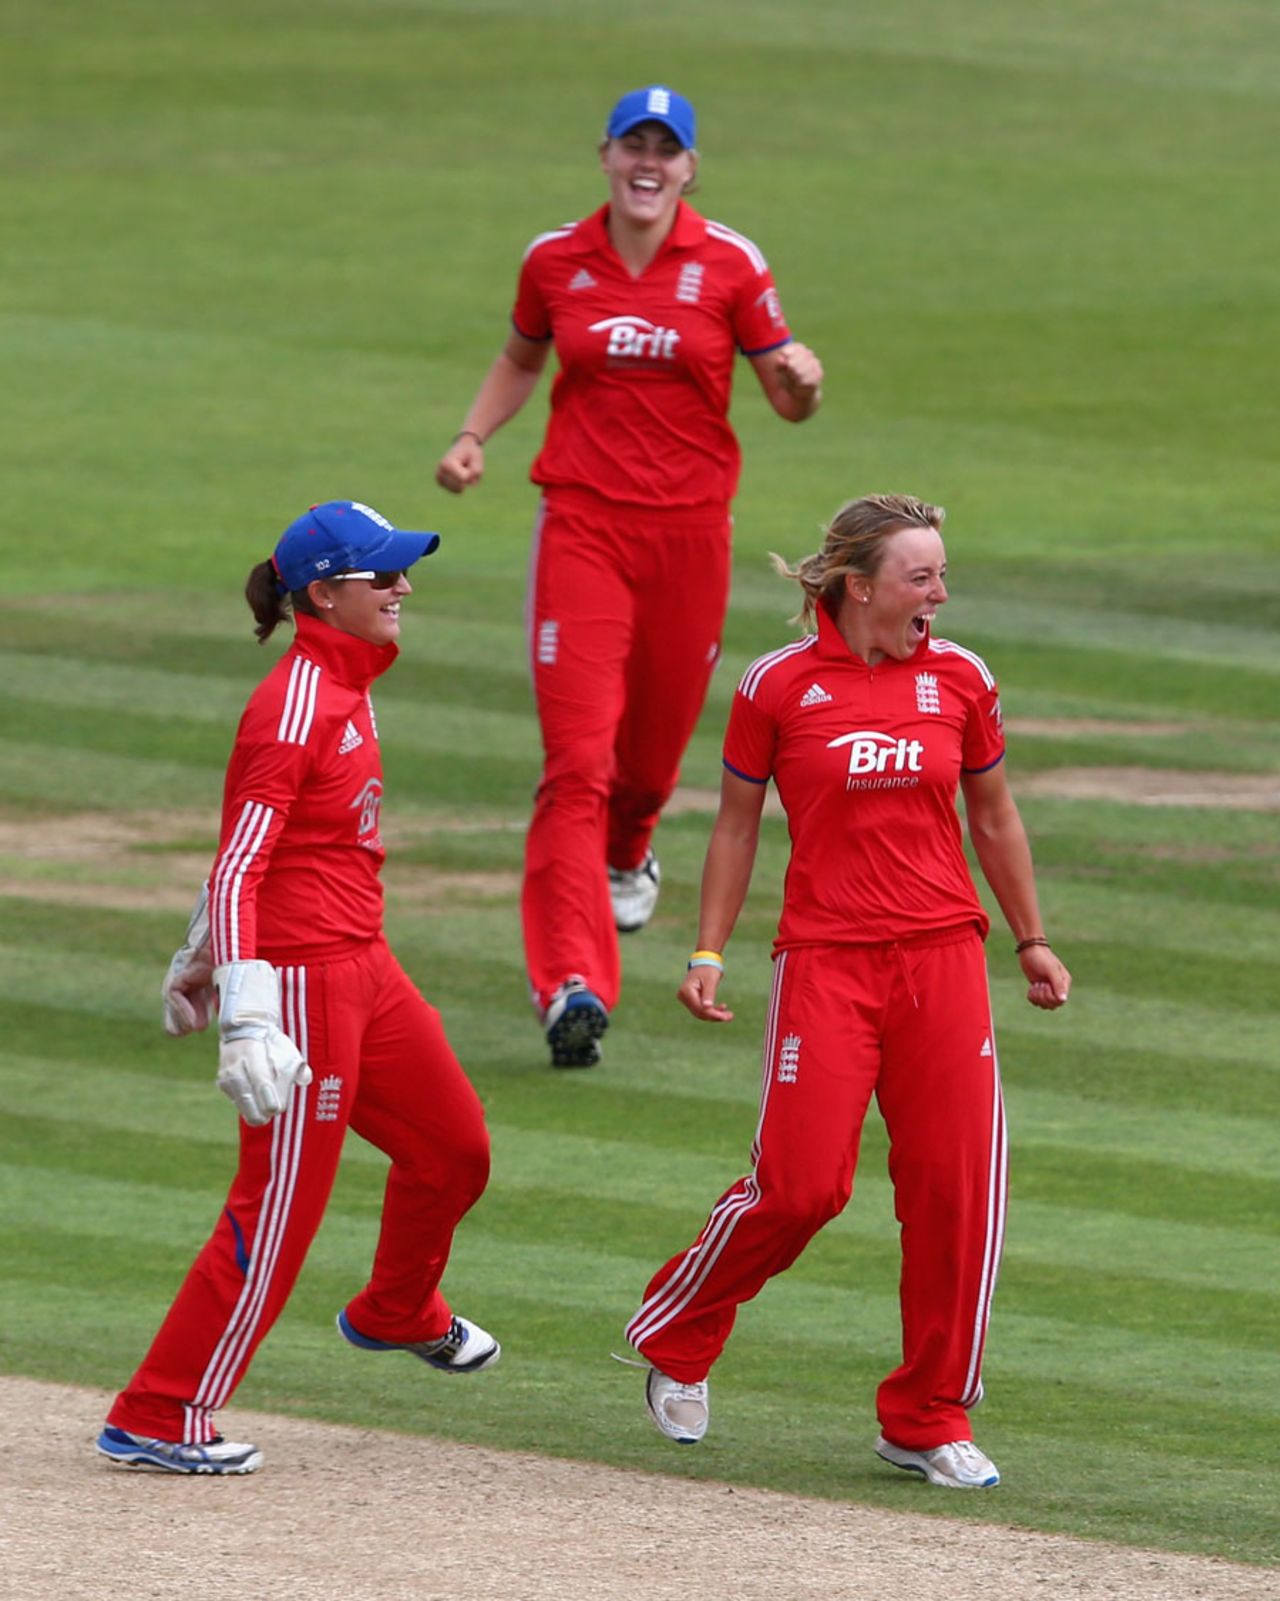 Danielle Hazell took two wickets in the final over, England v Australia, 2nd women's T20, Ageas Bowl, August 29, 2013